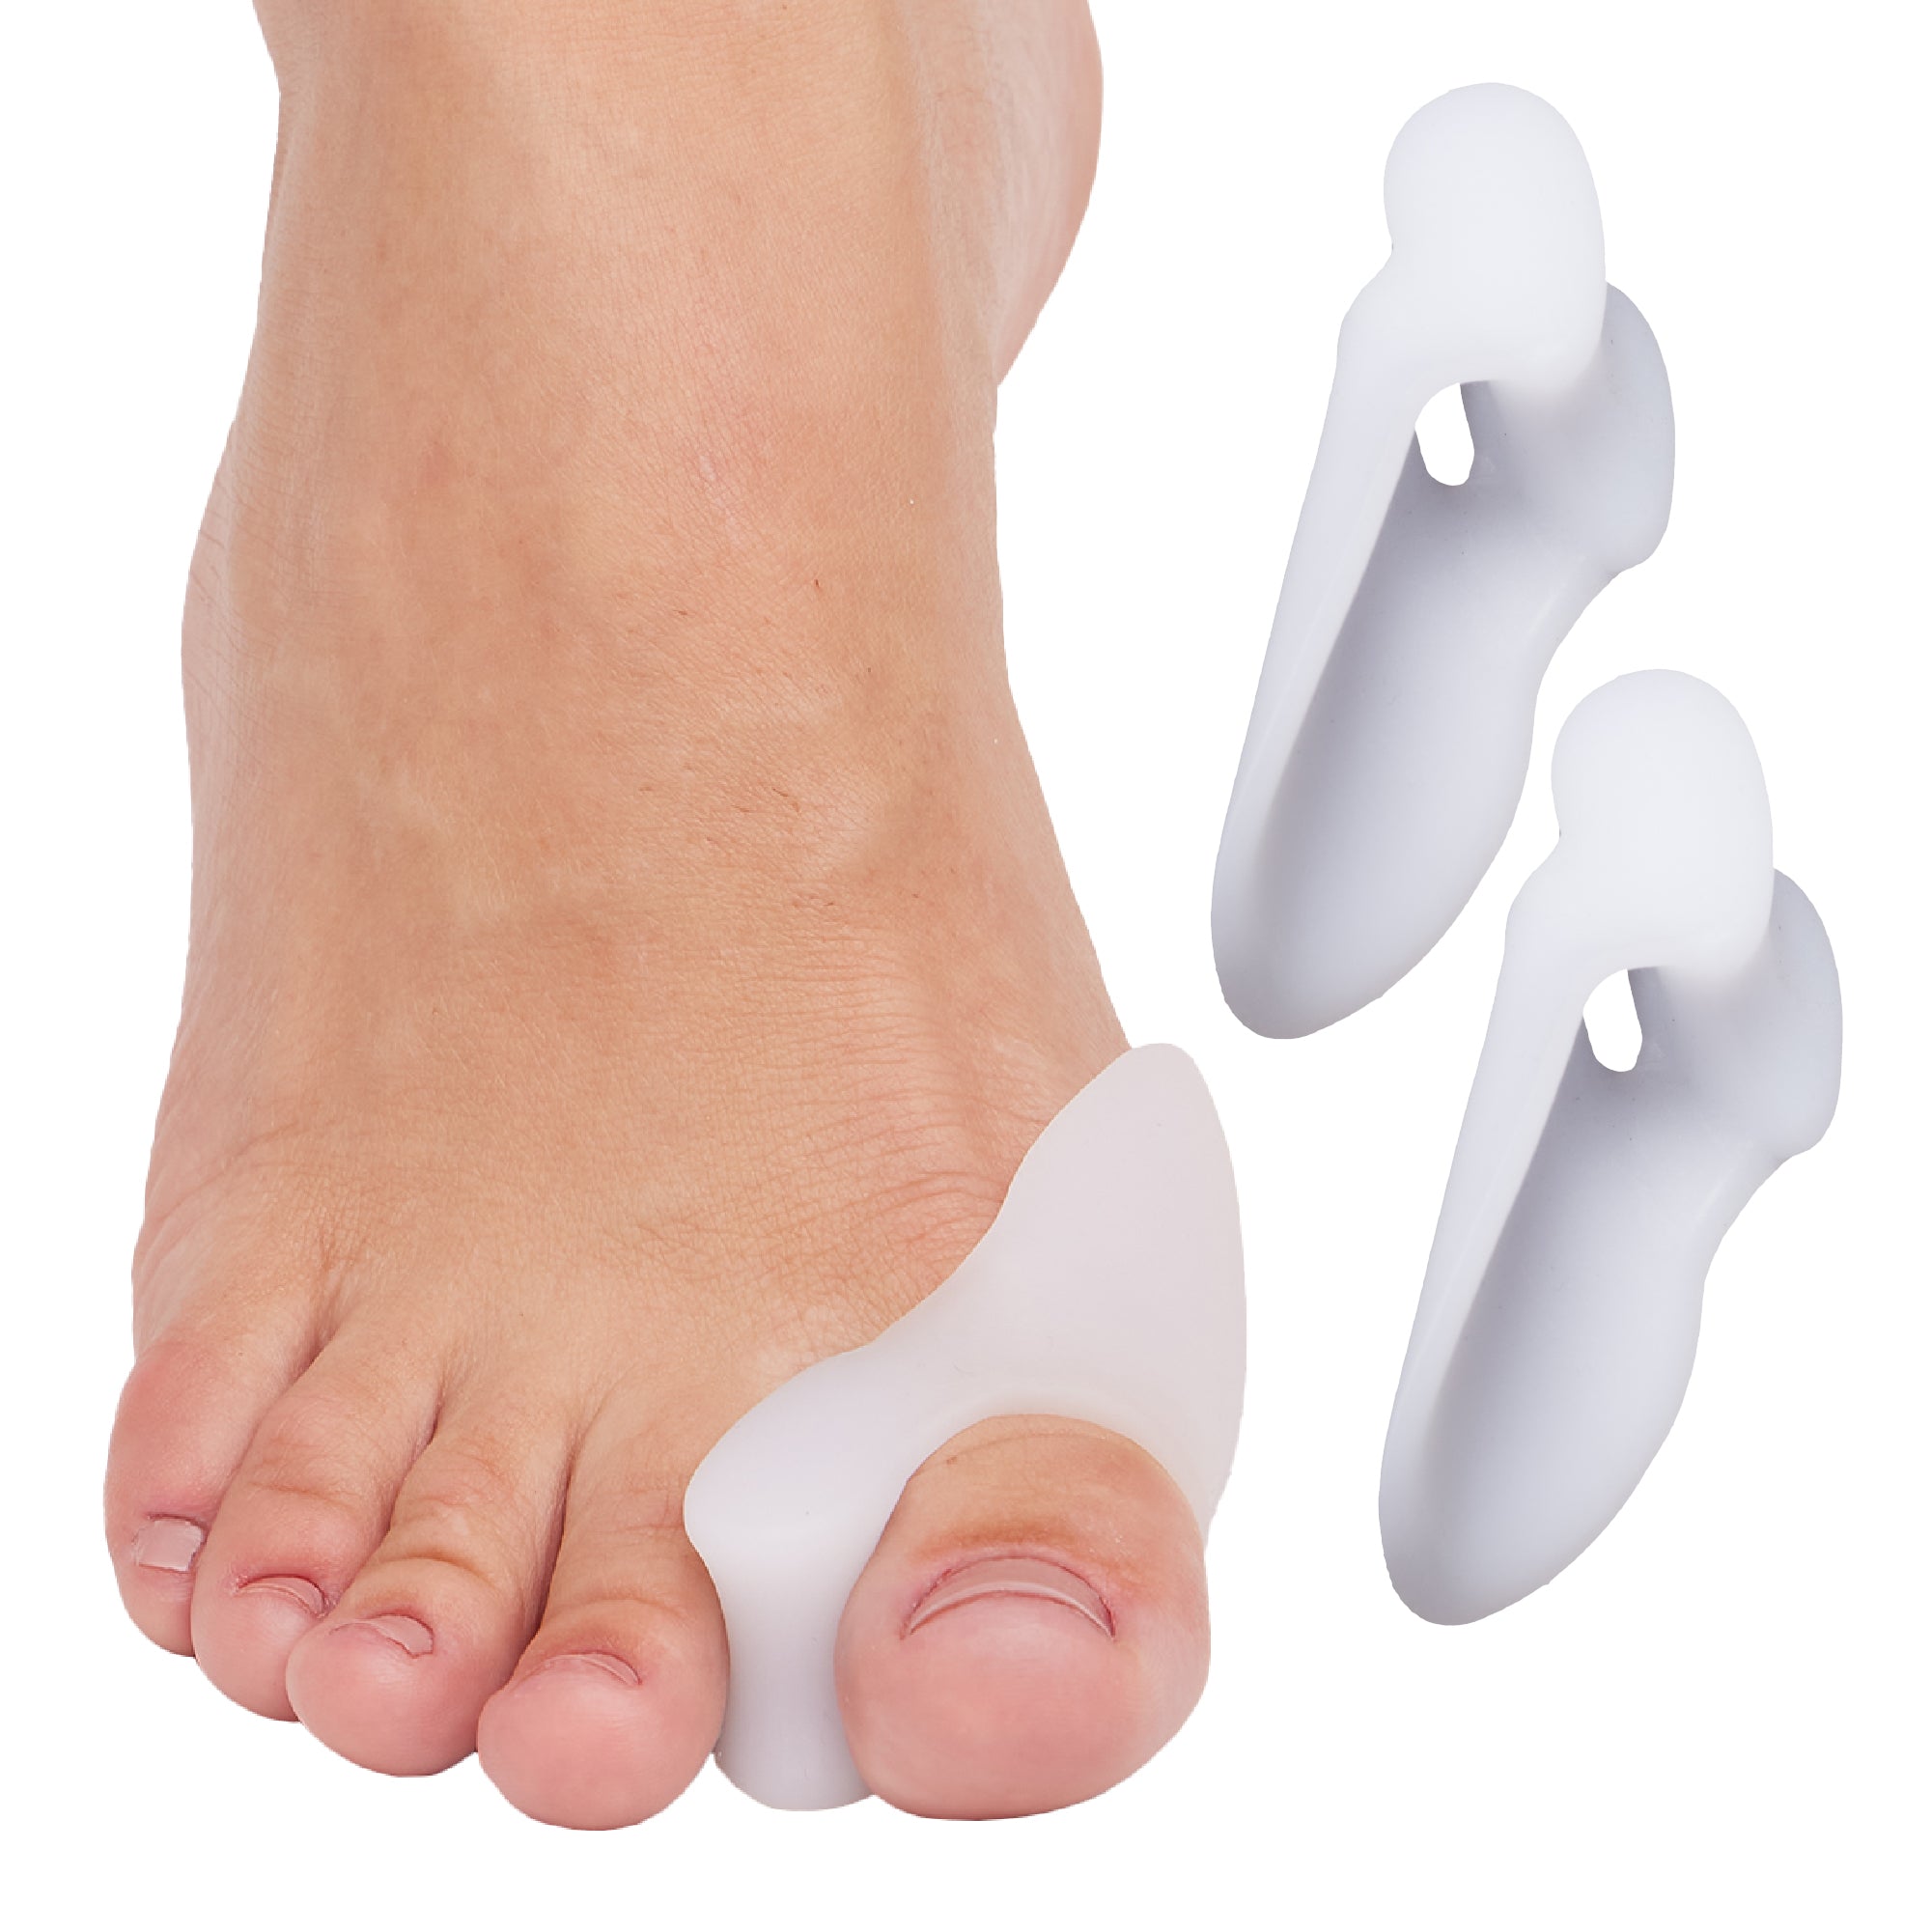 Silicone Toe Spacers for Correct Toe Alignment - 2 Pairs - White